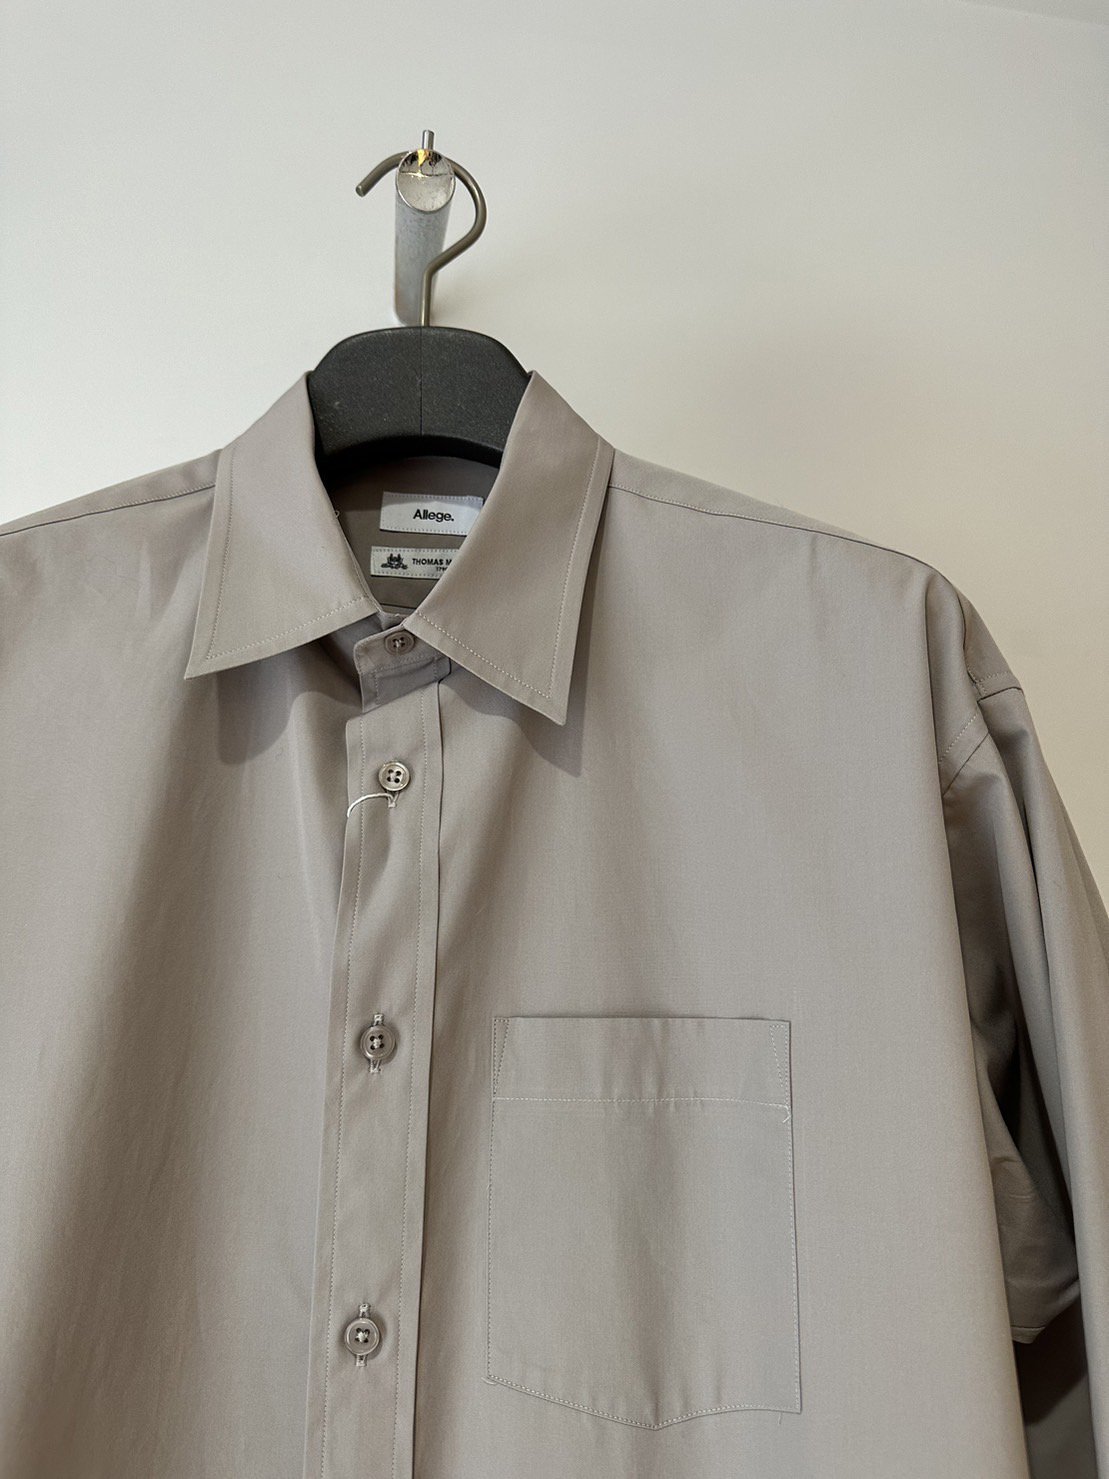 ALLEGE<br />Standard  Shirt / Beige<img class='new_mark_img2' src='https://img.shop-pro.jp/img/new/icons14.gif' style='border:none;display:inline;margin:0px;padding:0px;width:auto;' />